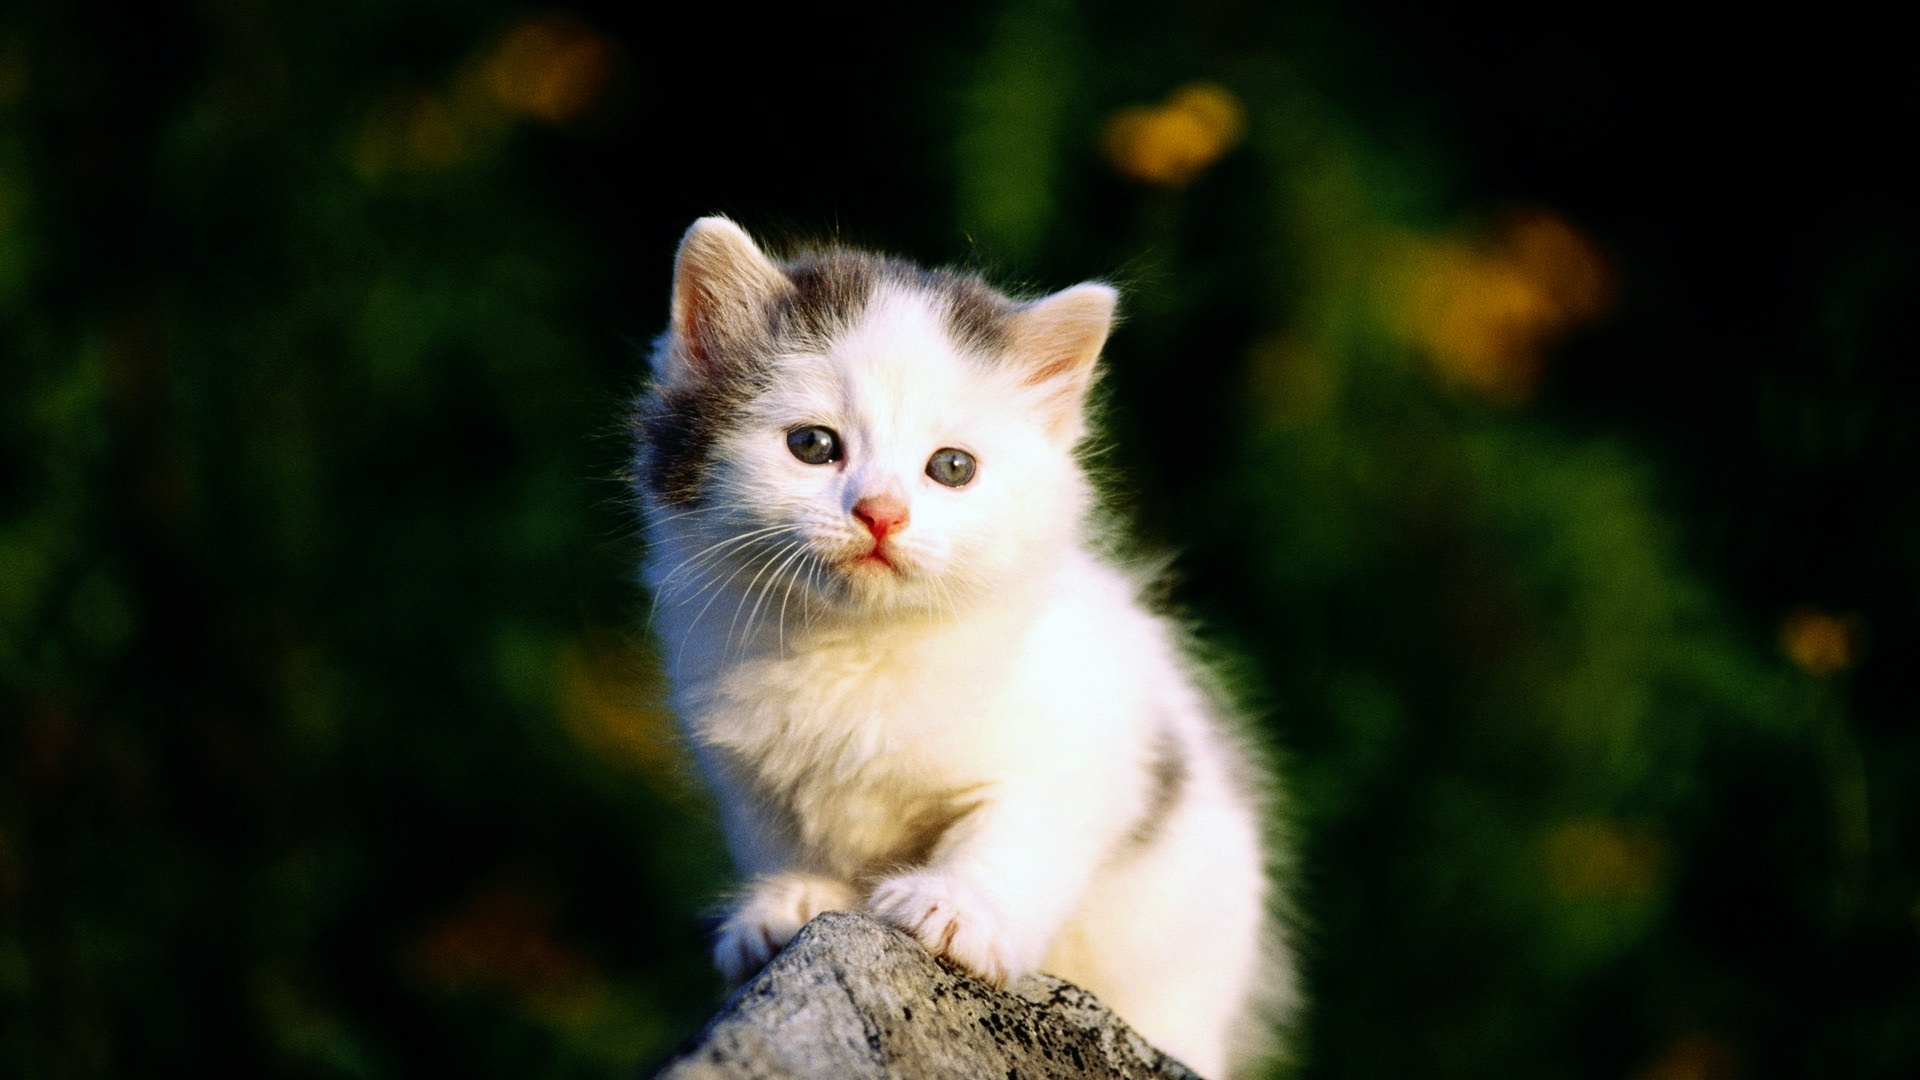 Sweet Cat HD Wallpaper From Photo Gallery